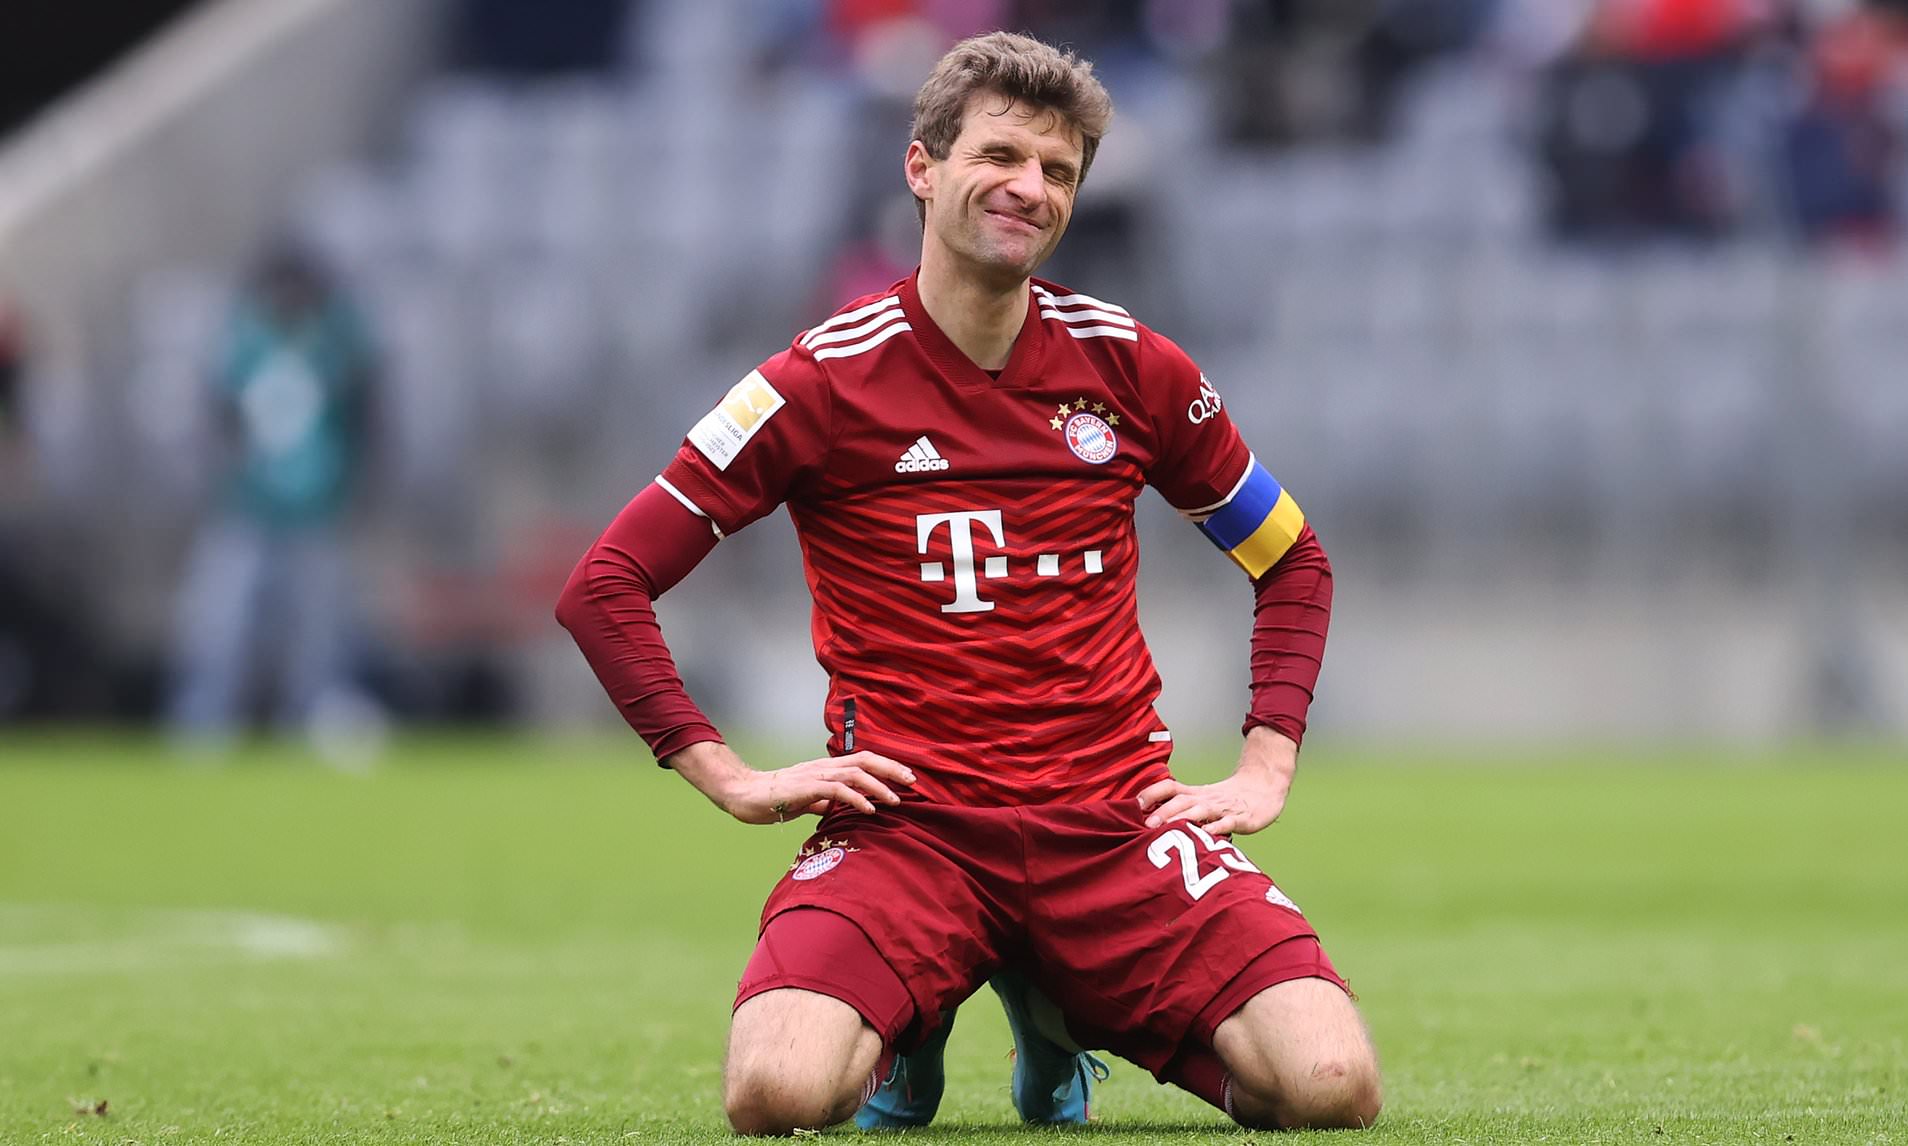 Muller Own-Goal Sees Points Shared Between Bayern And Leverkusen